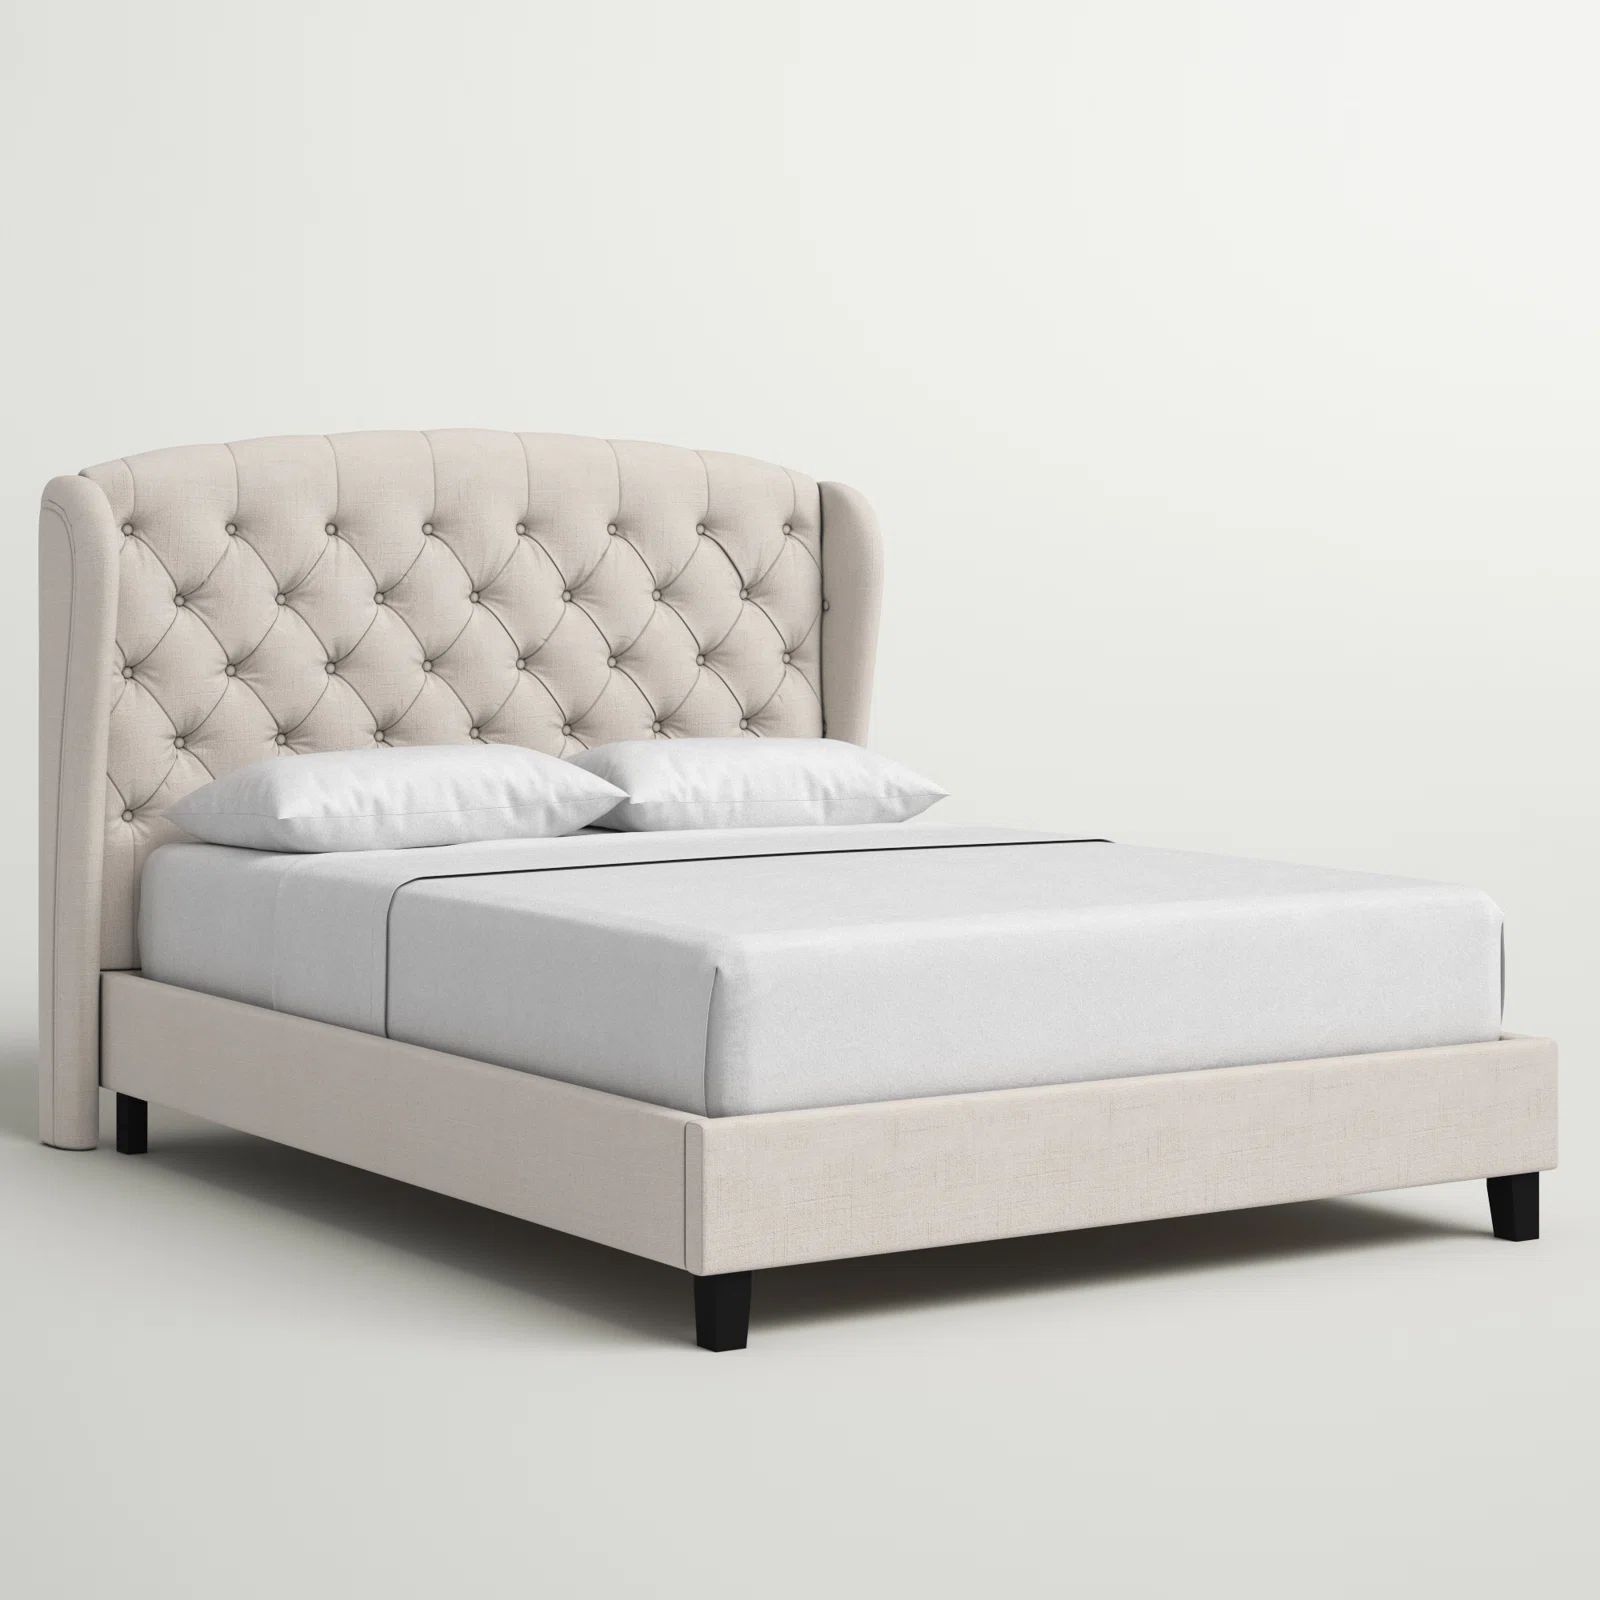 Autrey Upholstered Bed | Wayfair North America